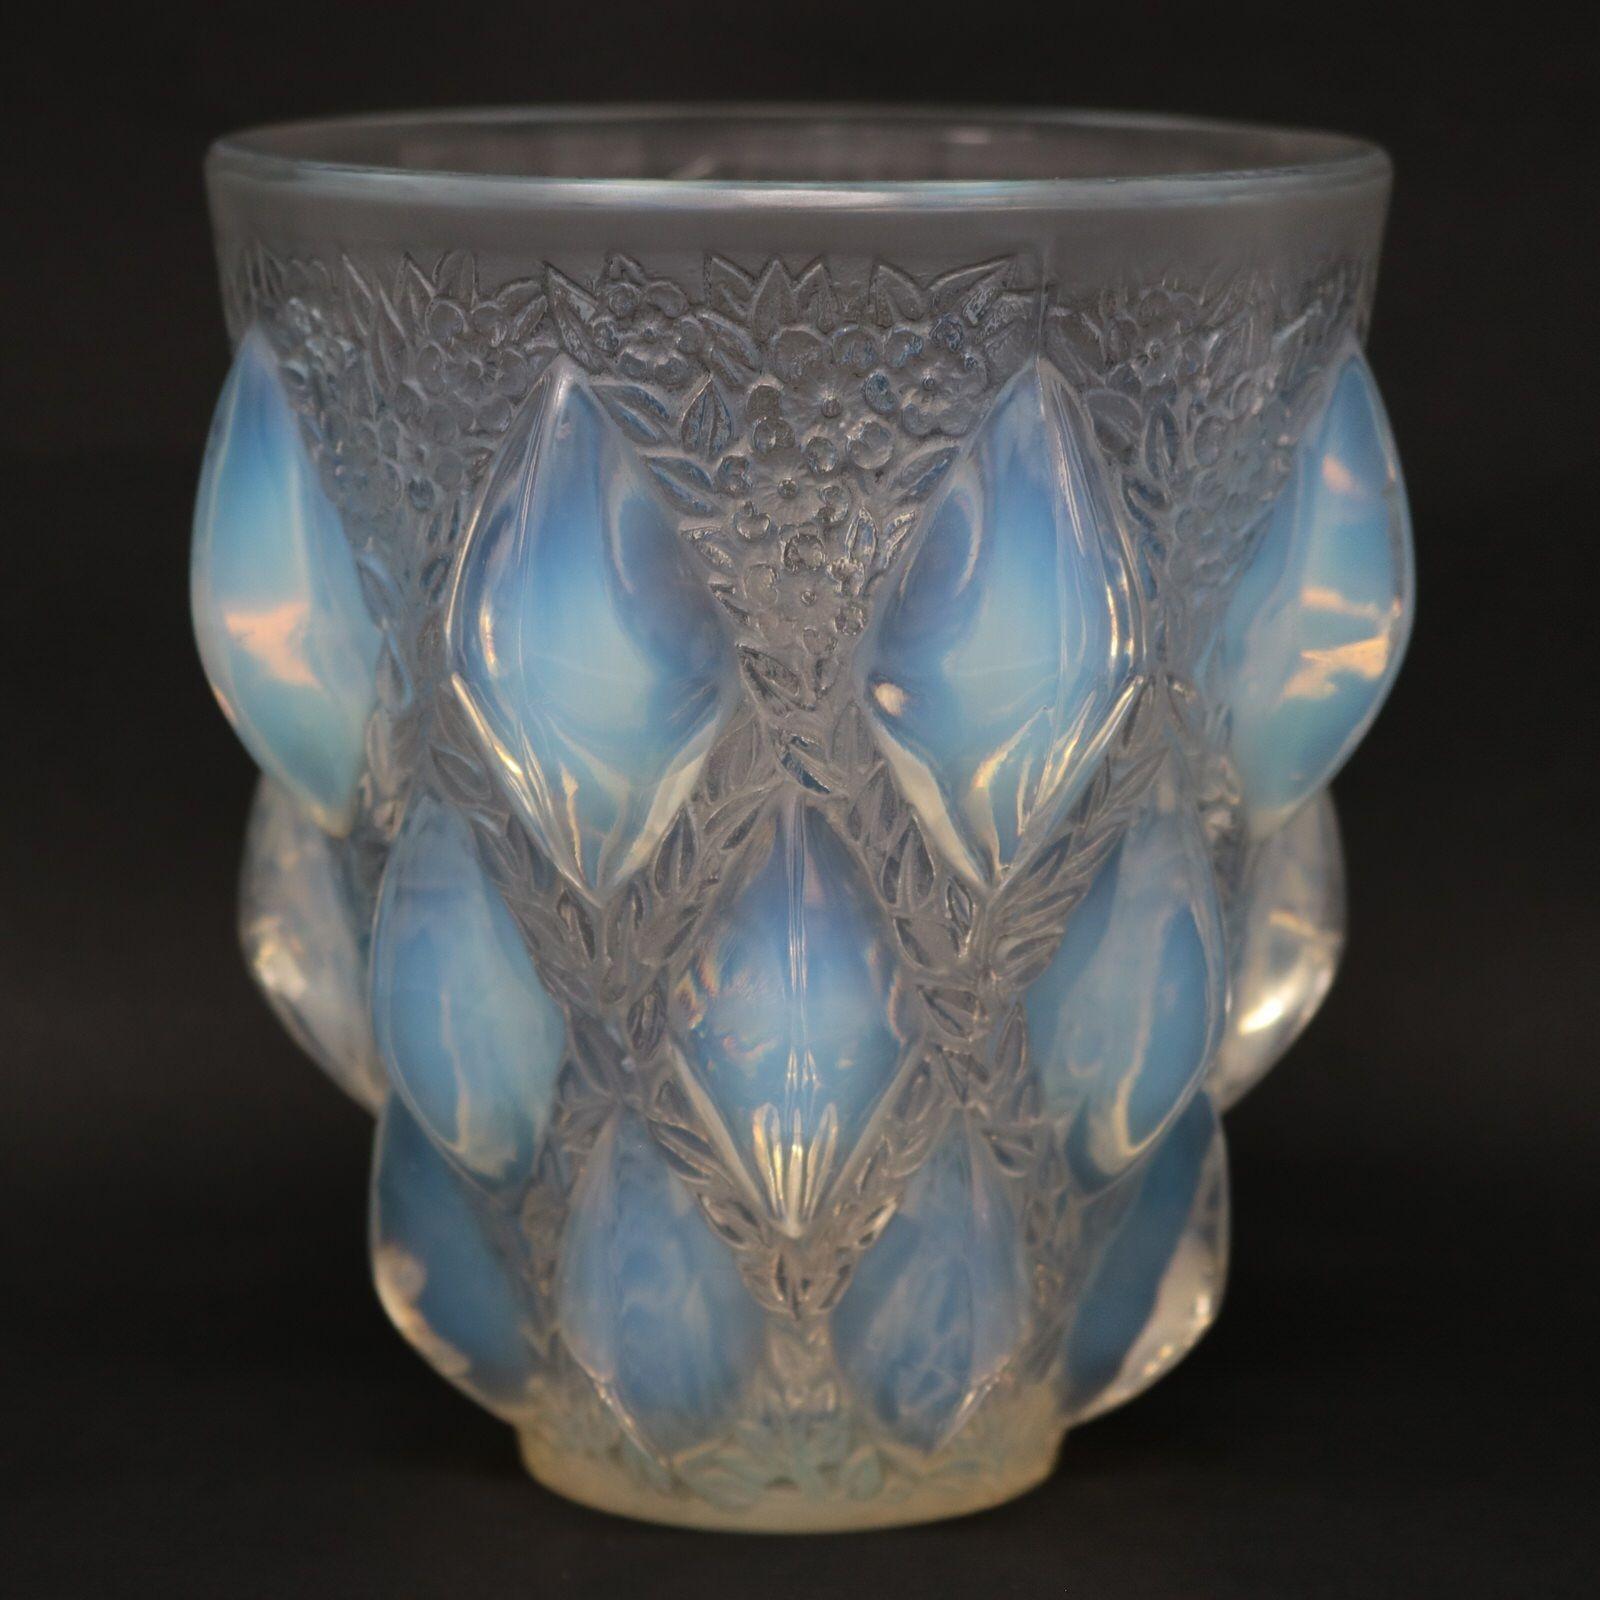 Rene Lalique Opalescent glass 'Rampillon' vase. This pattern features deeply embossed diamond shapes, surrounded by flowers and leaves. Makers mark stencilled, 'R. LALIQUE FRANCE'. Book reference: Marcilhac 991.